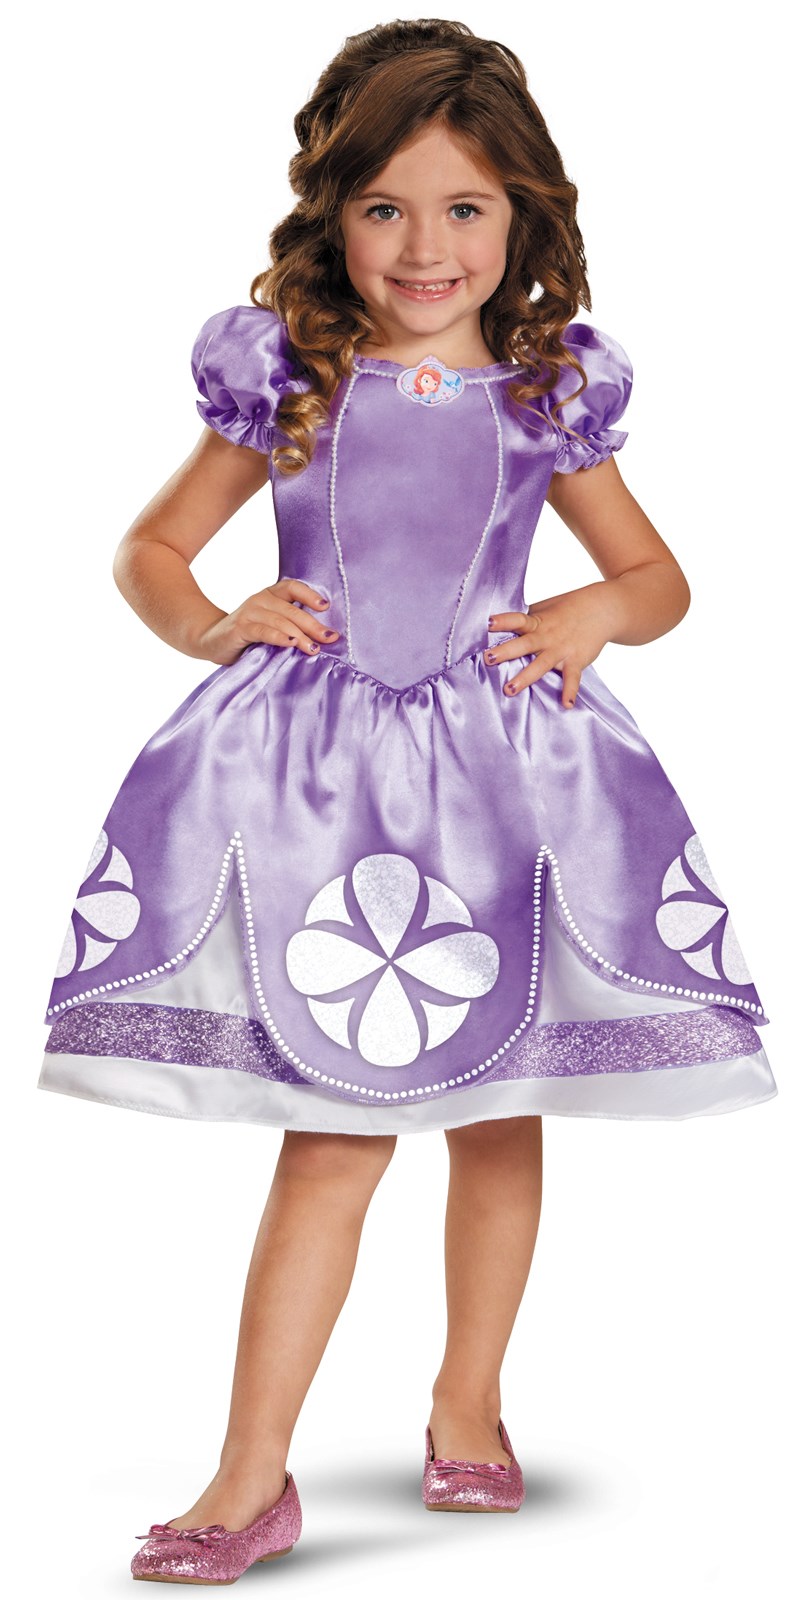 Disney Sofia the First Toddler / Child Costume